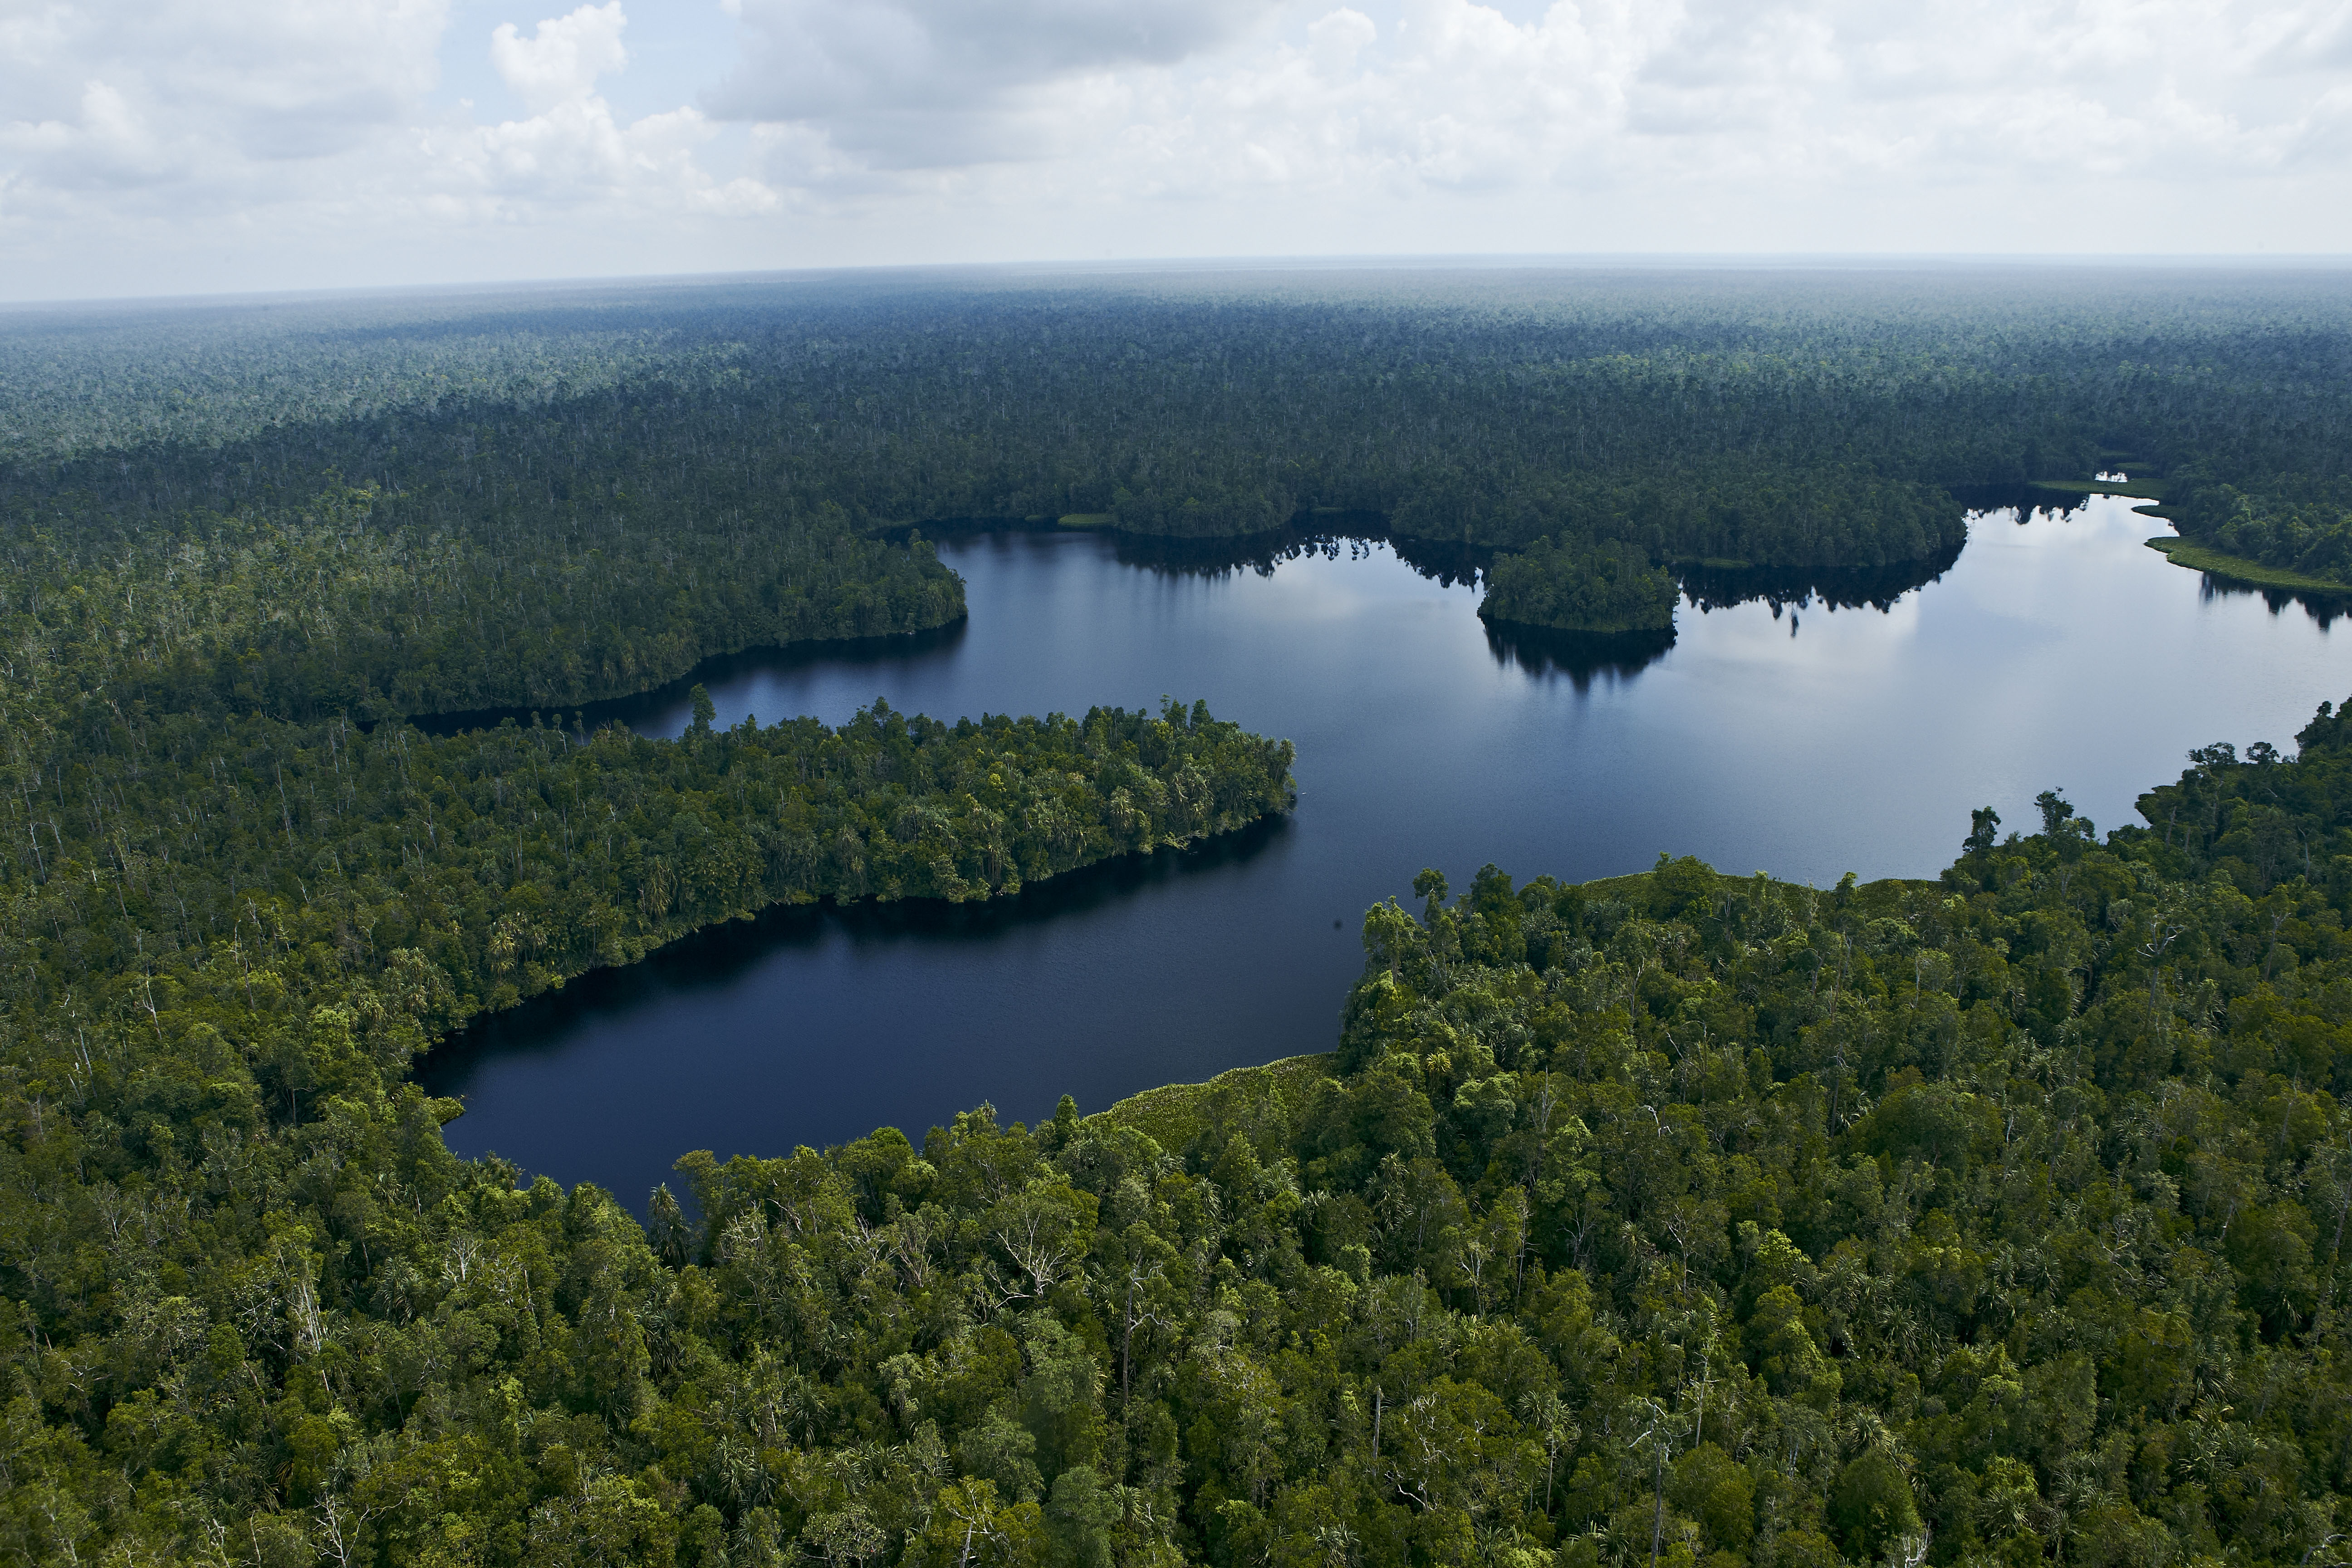 Restorasi Ekosistem Riau (RER) was launched in 2013 to protect ecologically important pat forest in Kampar Peninsula, Riau, Indonesia. 